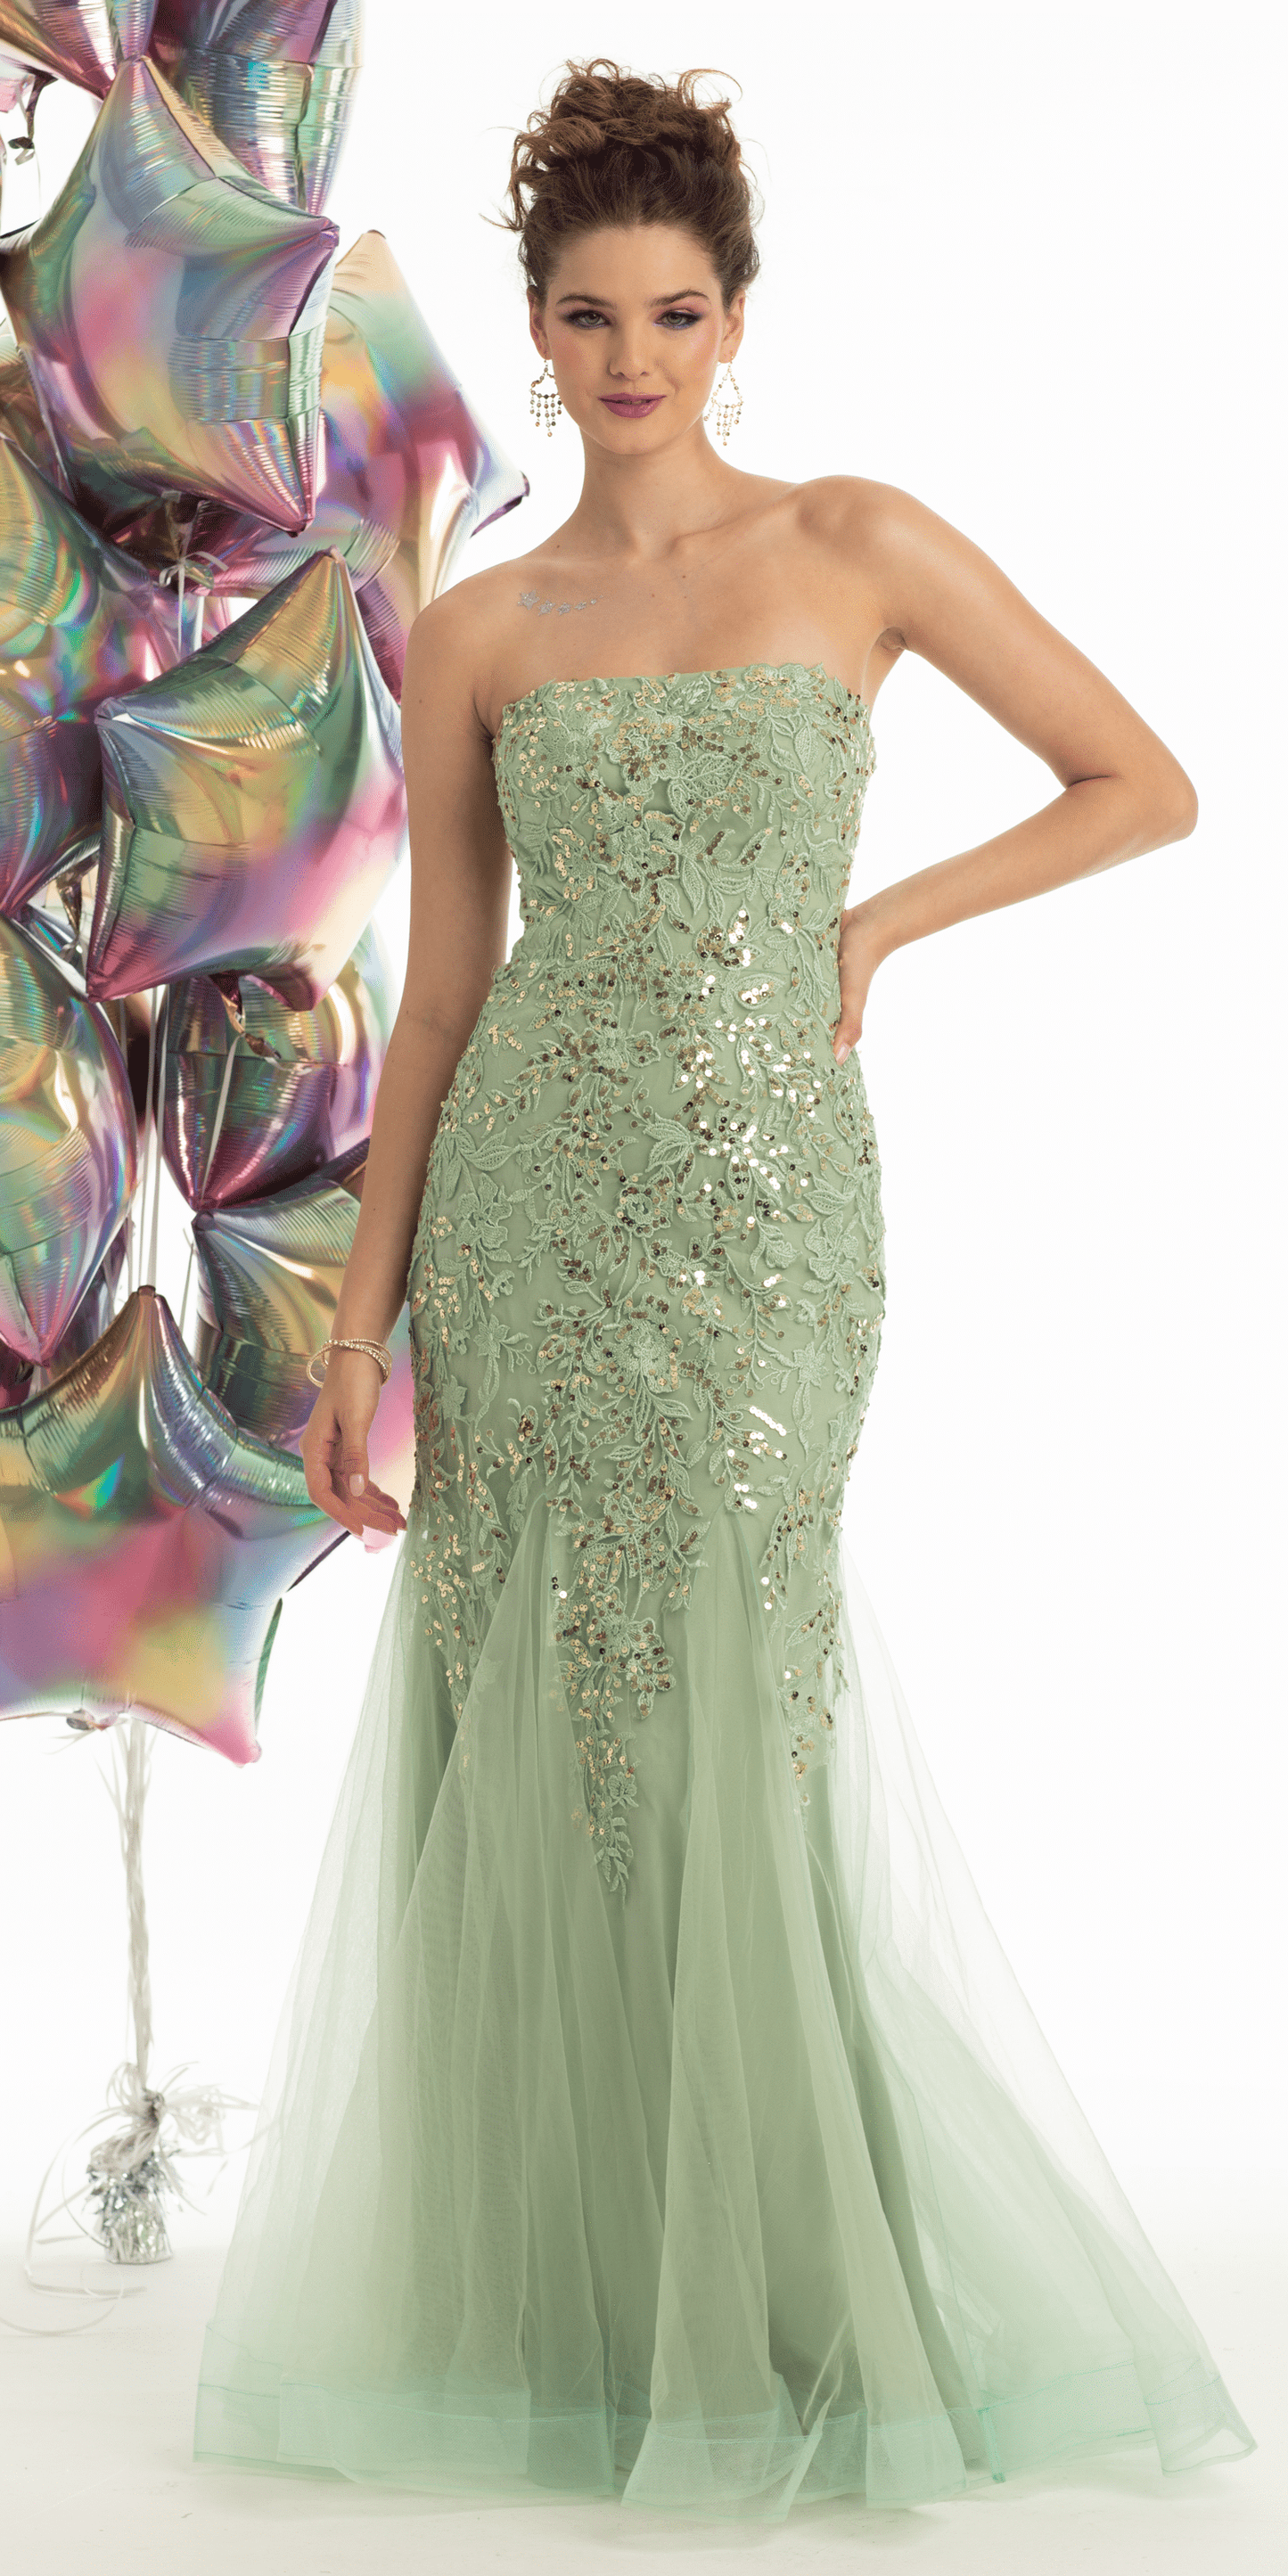 Camille La Vie Strapless Embroidered Mermaid Dress with Mesh Godets missy / 00 / mint